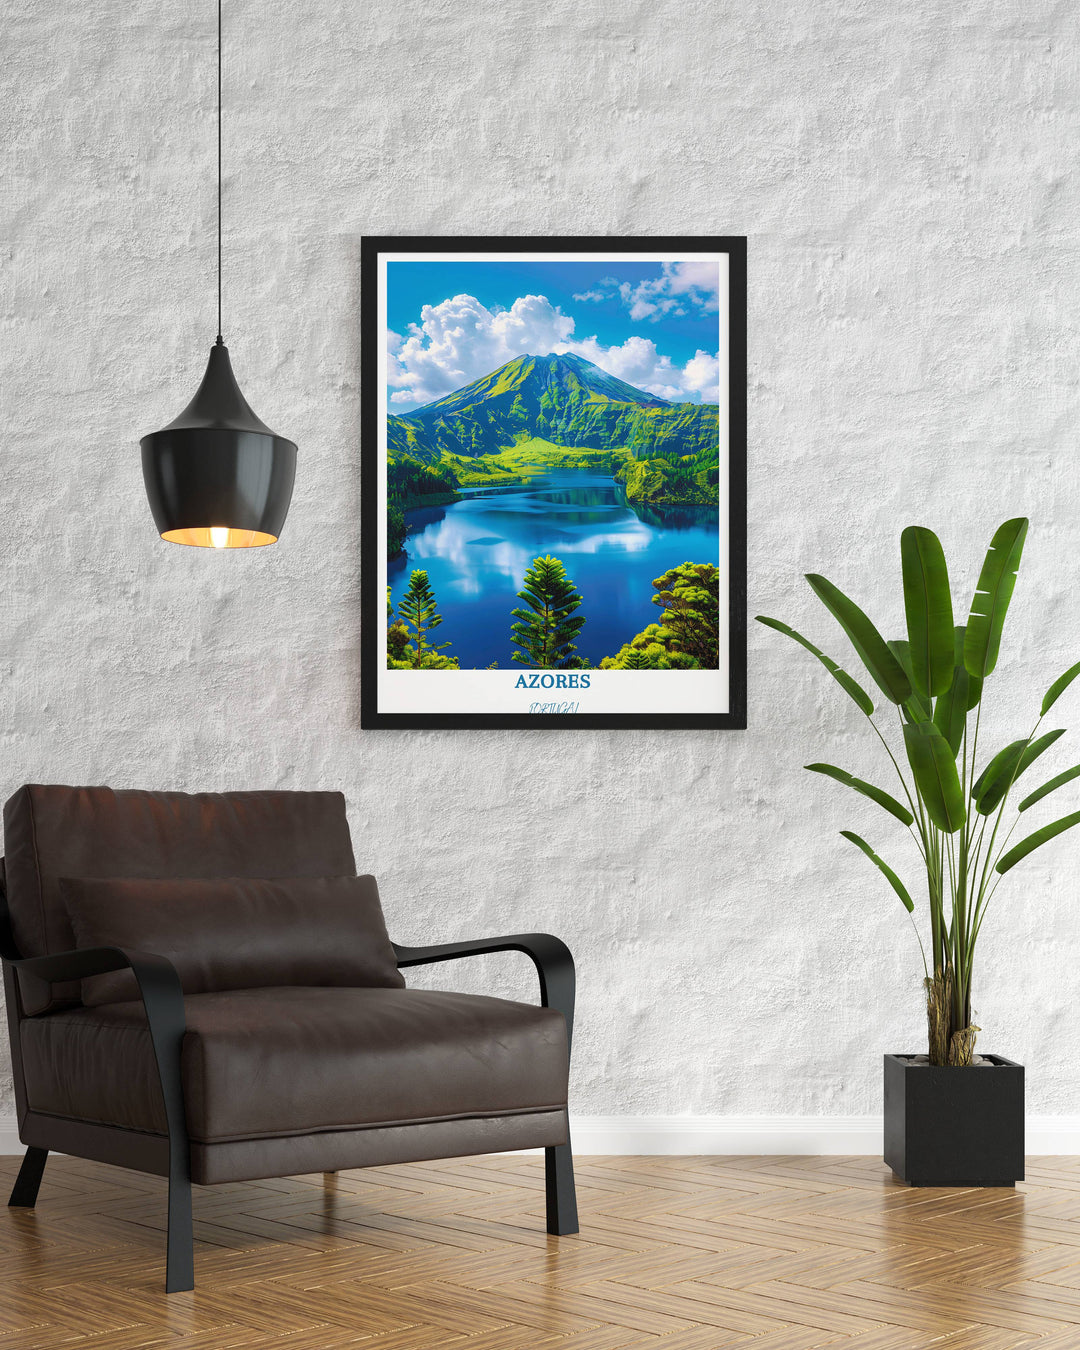 Transport yourself to the Azores with this captivating wall art. A window into the enchanting landscapes of Portugal